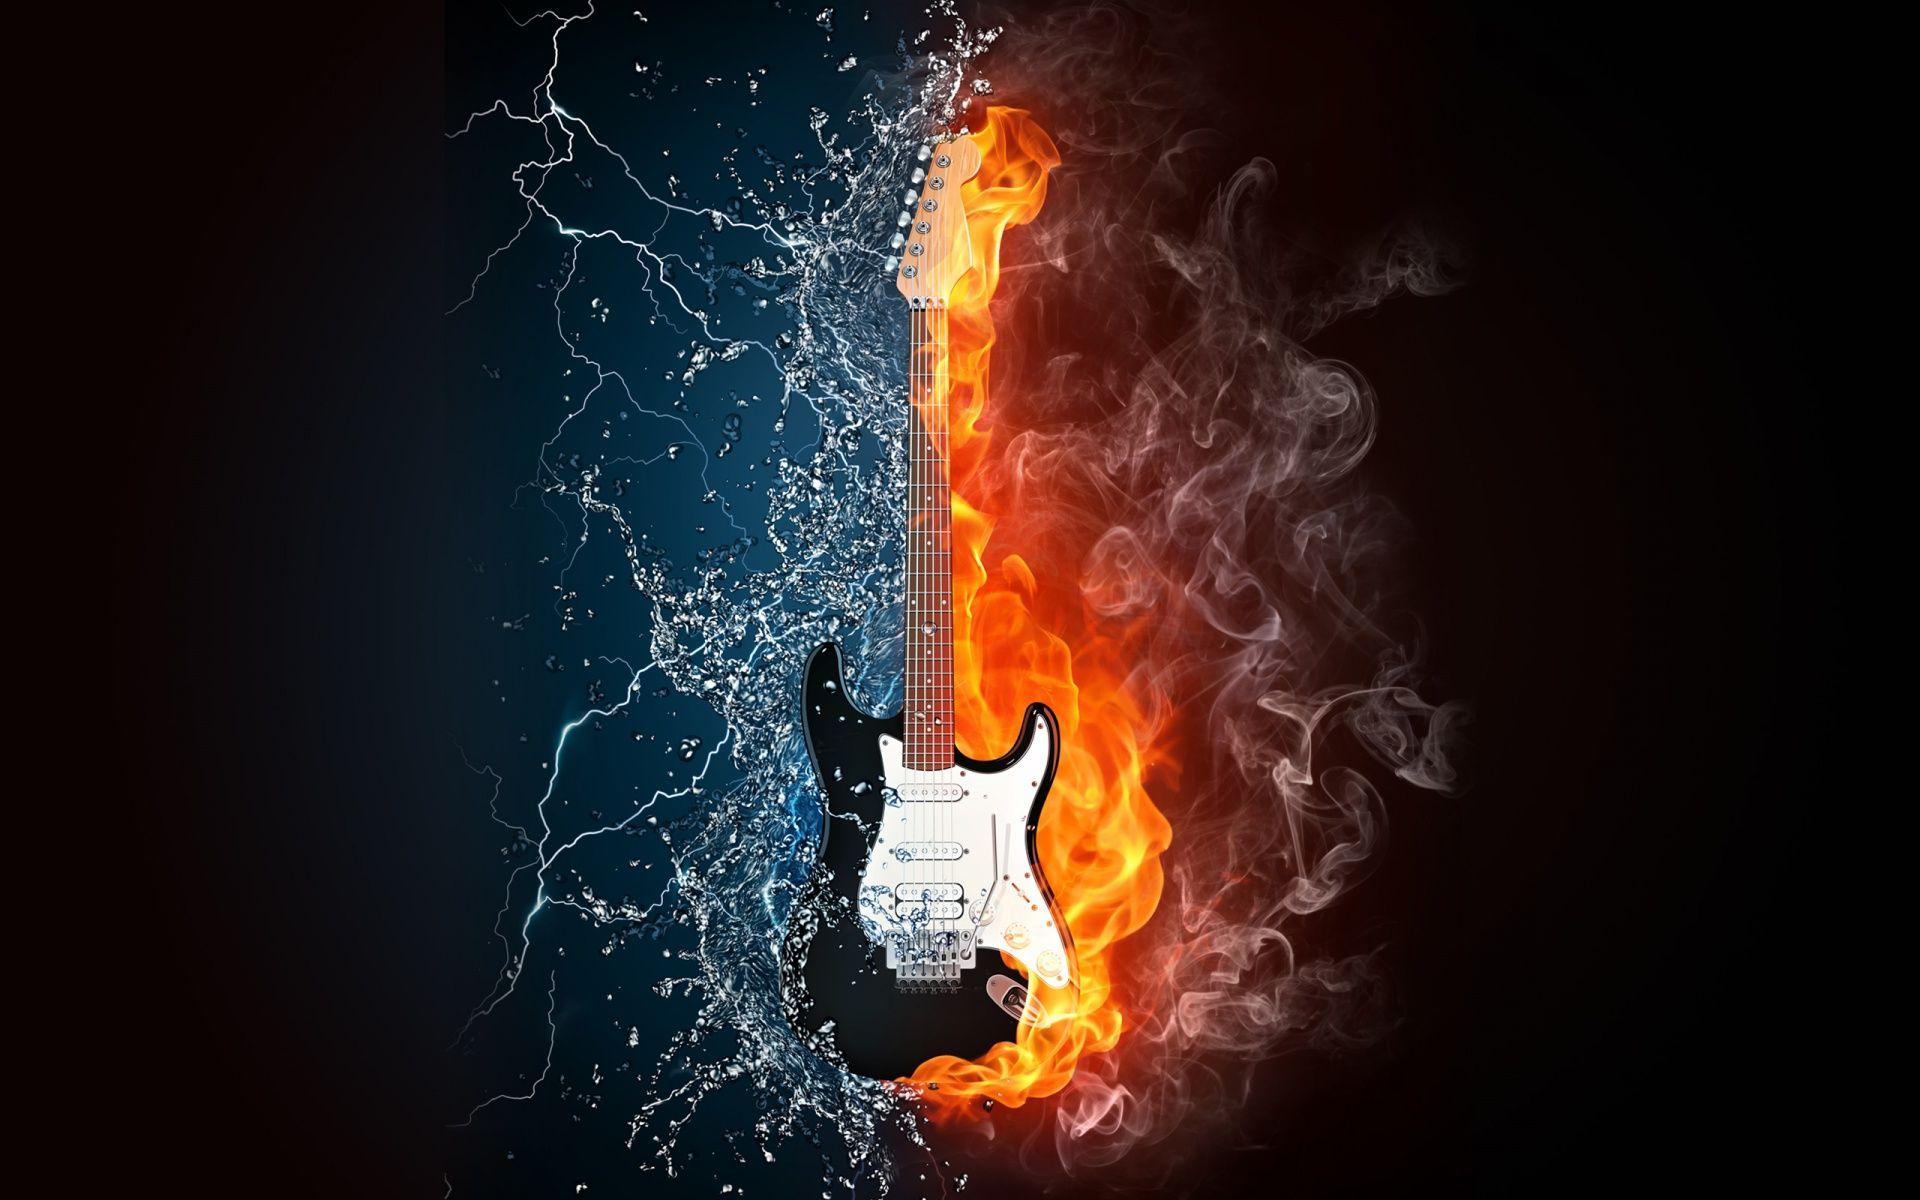 music is life fire is passion and water is everything